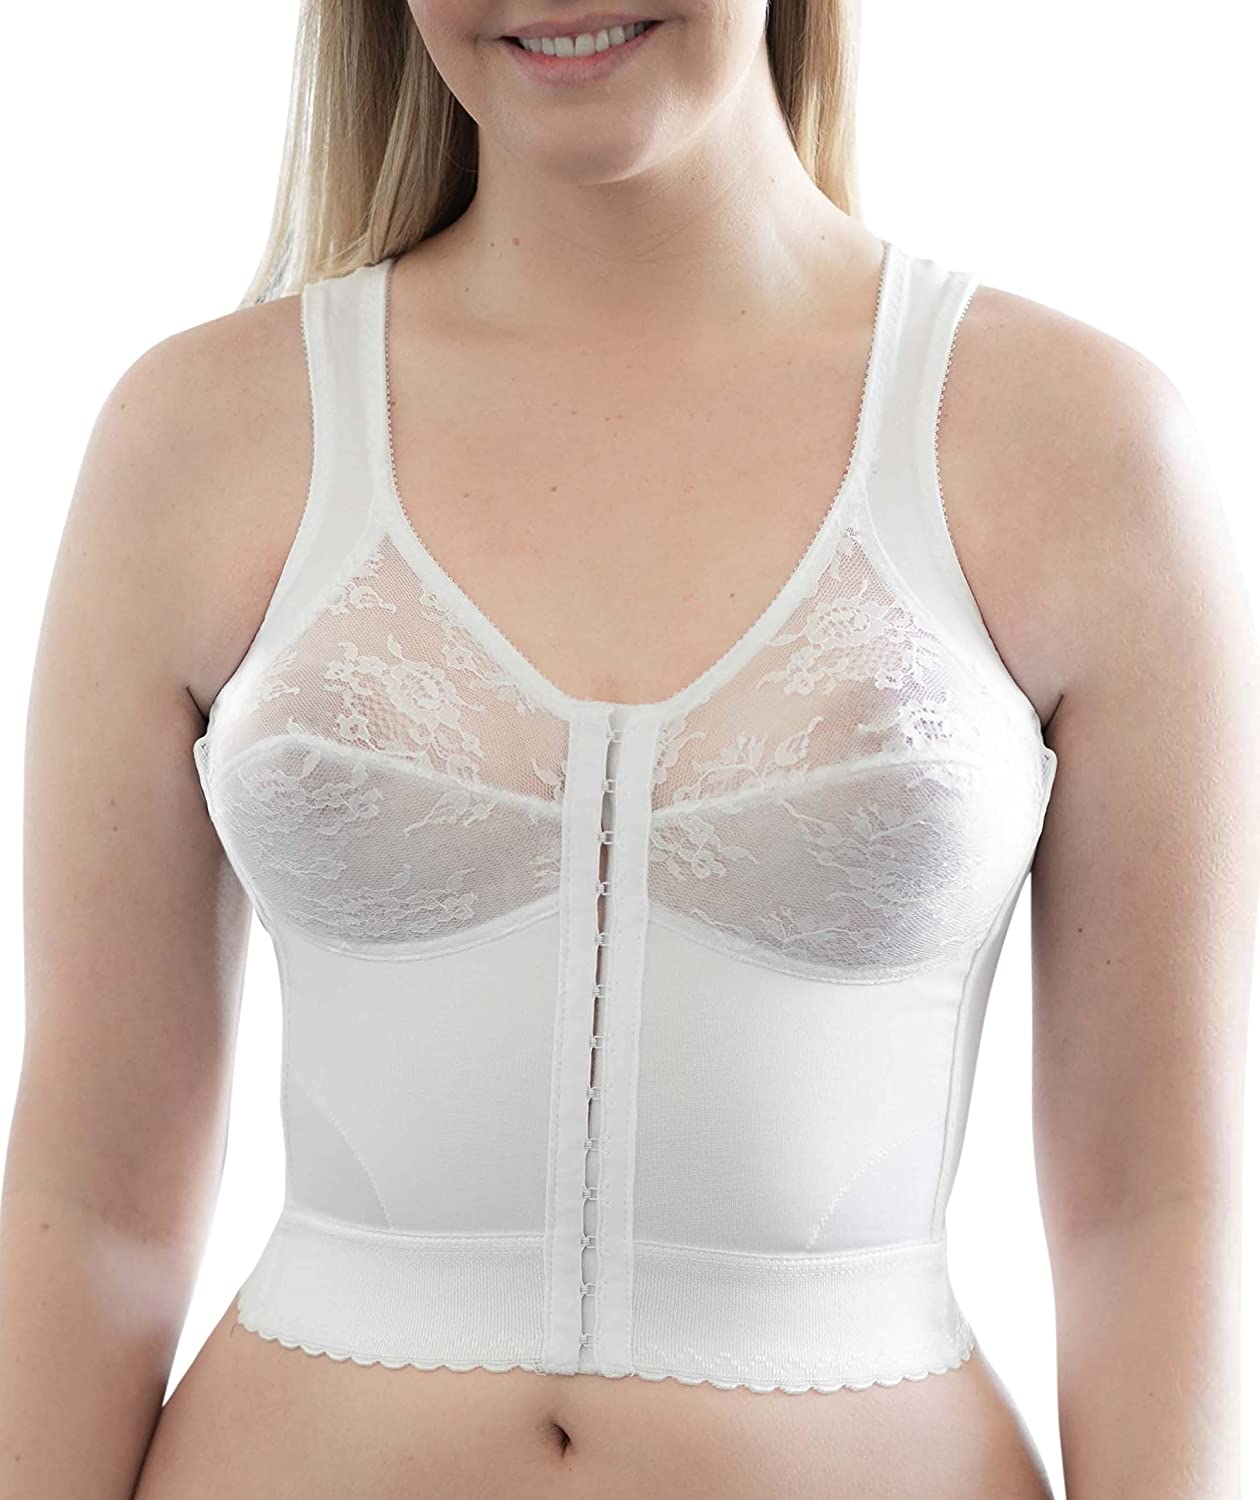 Cortland Intimates Womens Front Closure Back Support Long Line Bra Apparel Direct Distributor 